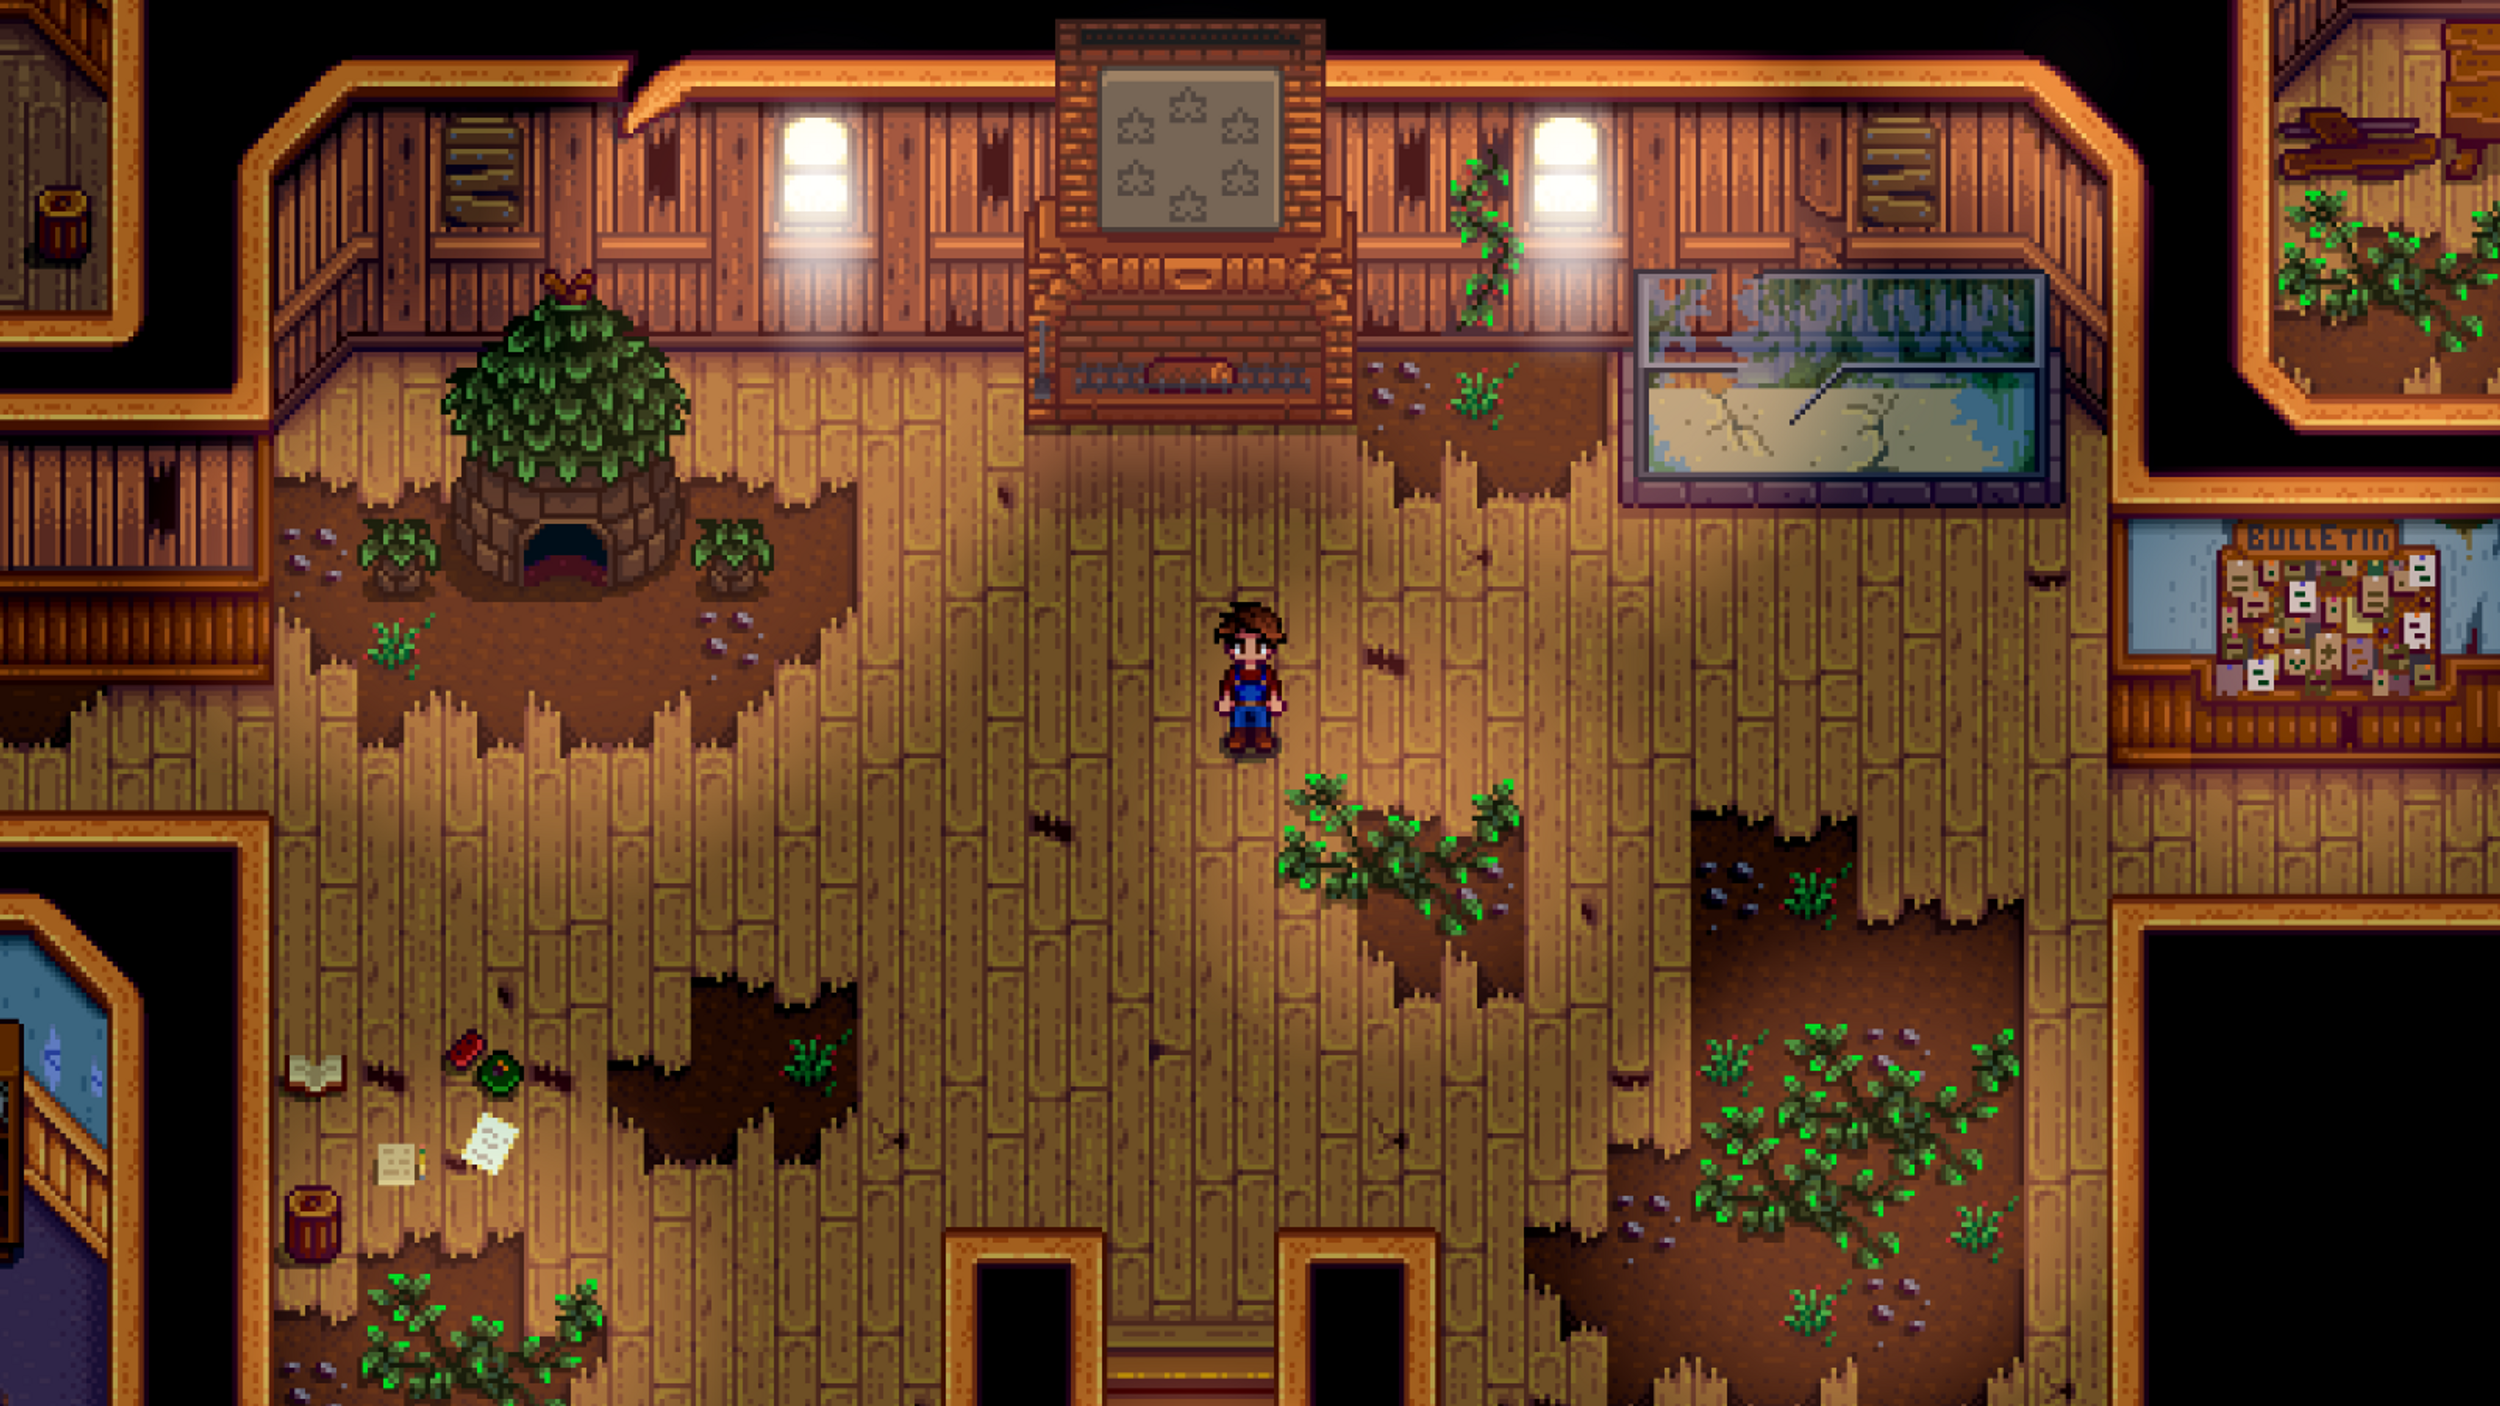 4] [PlayStation PS-4 - Valley Stardew